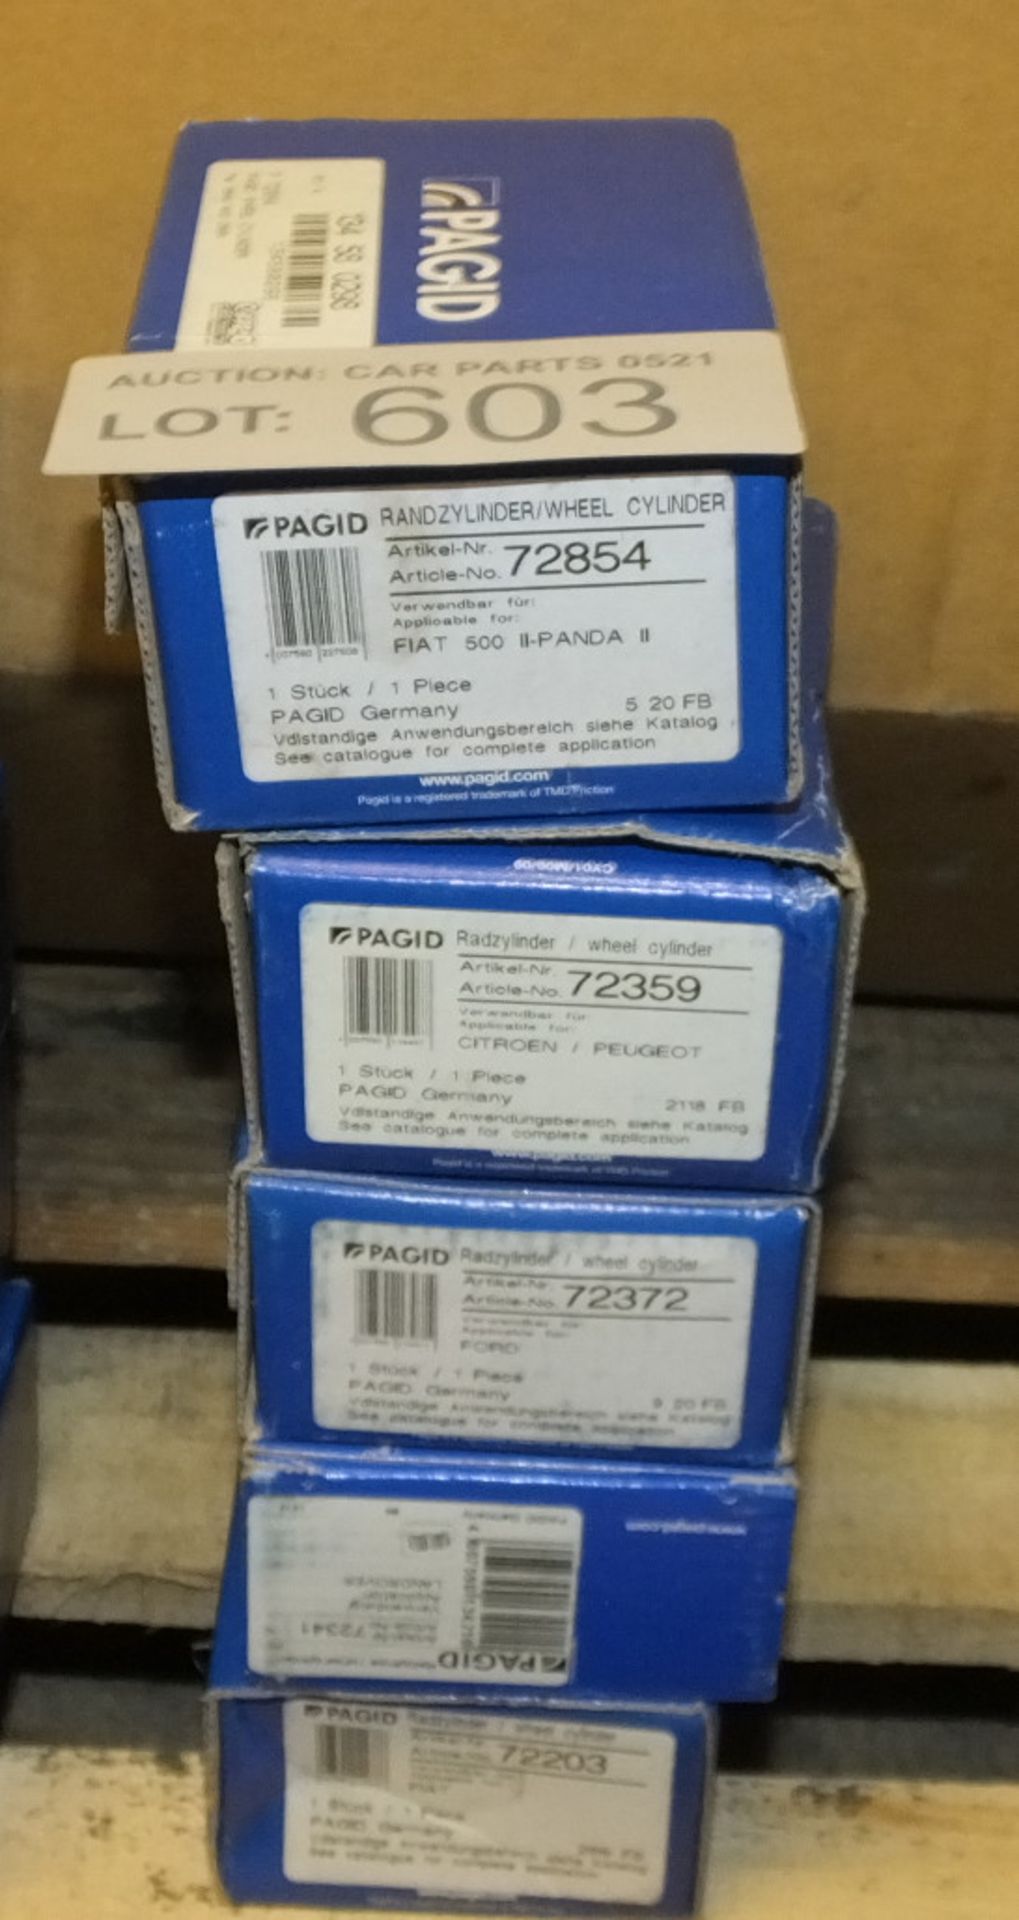 5x Pagid Wheel Cylinders - Please see pictures for examples of model numbers